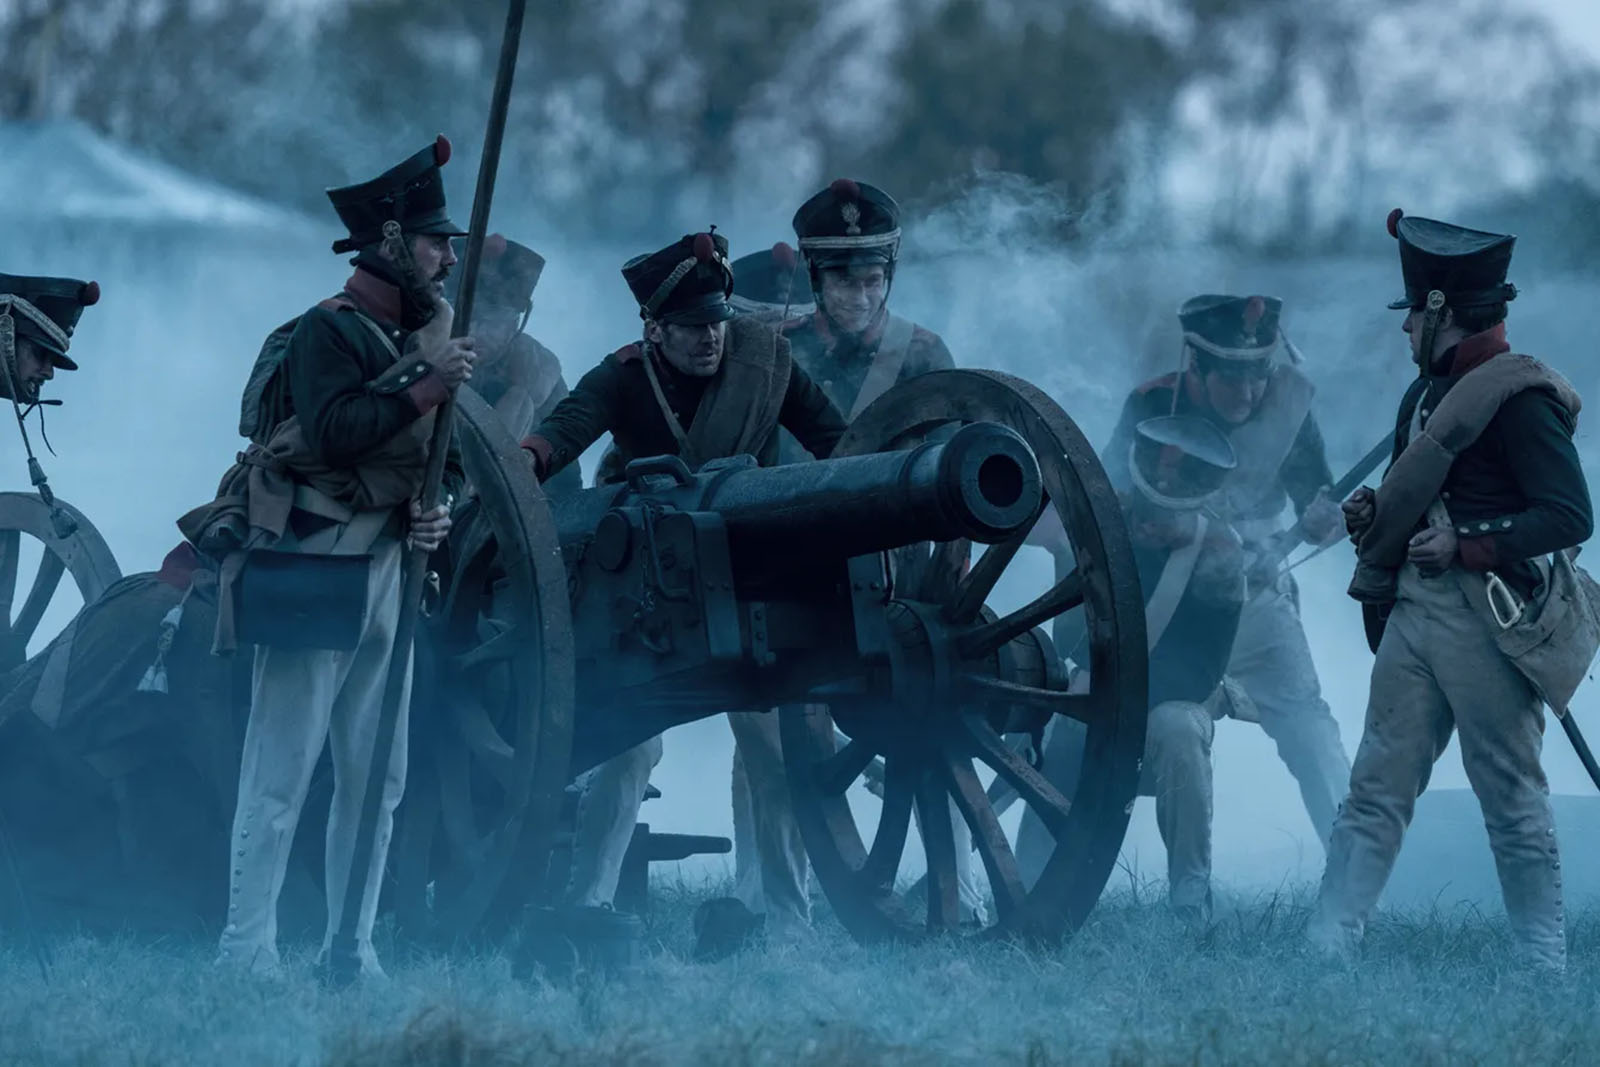 No shots were actually fired during Napoleon. The canons were filled with blanks. Image © Apple